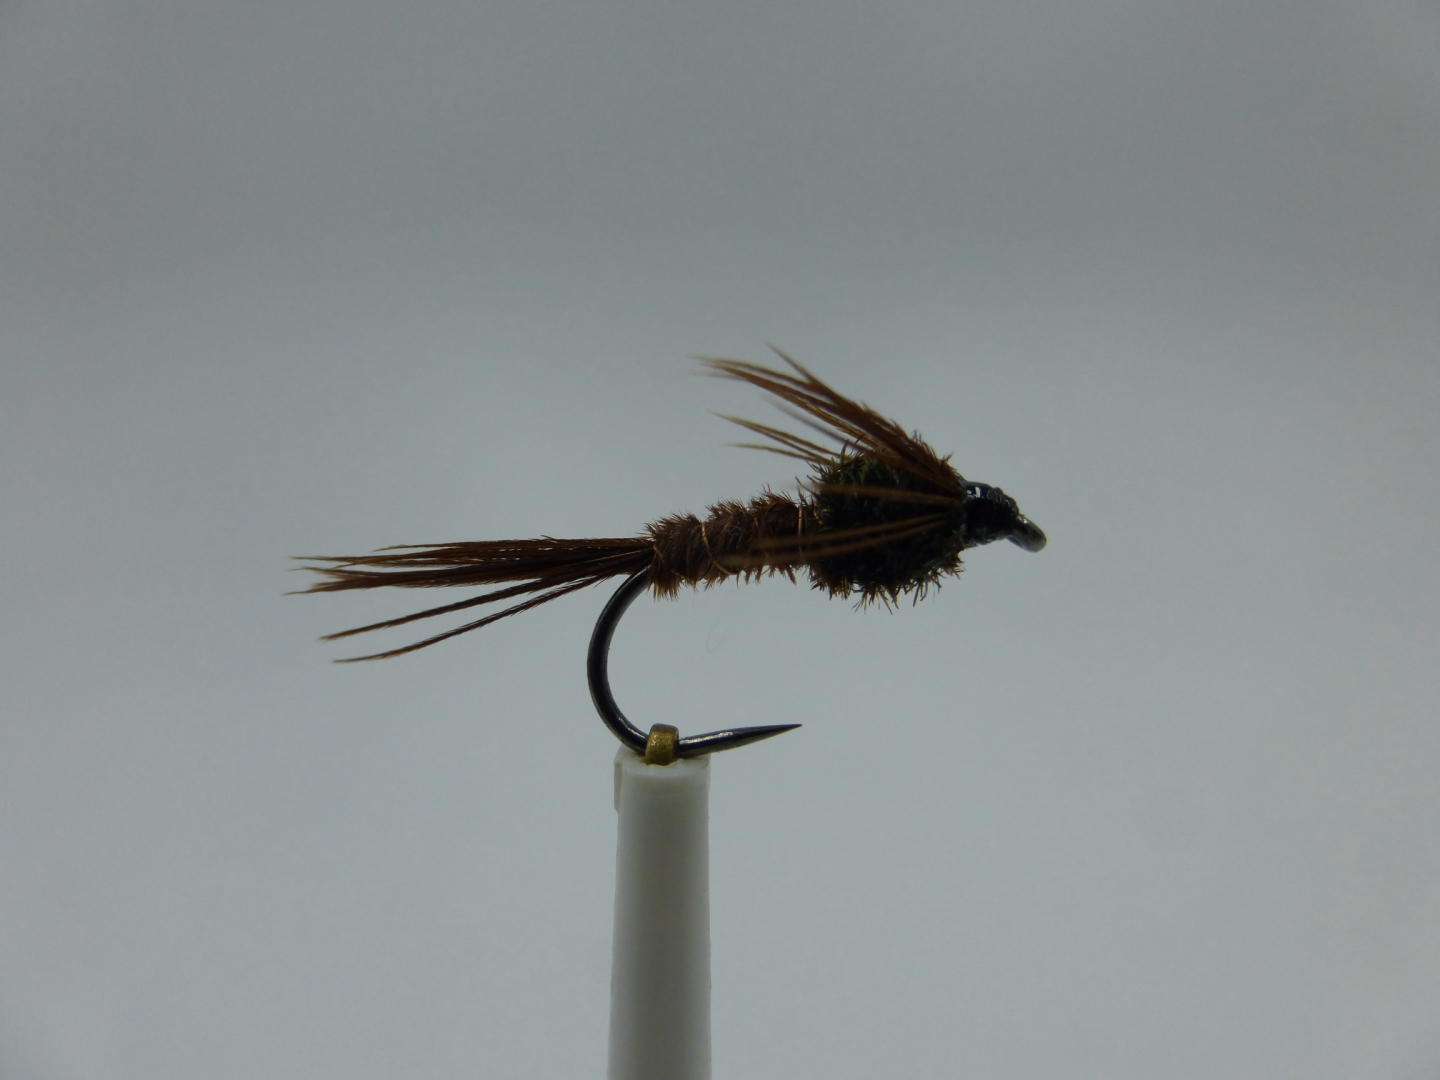 Size 16 Pheasant Tail Peacock Barbless